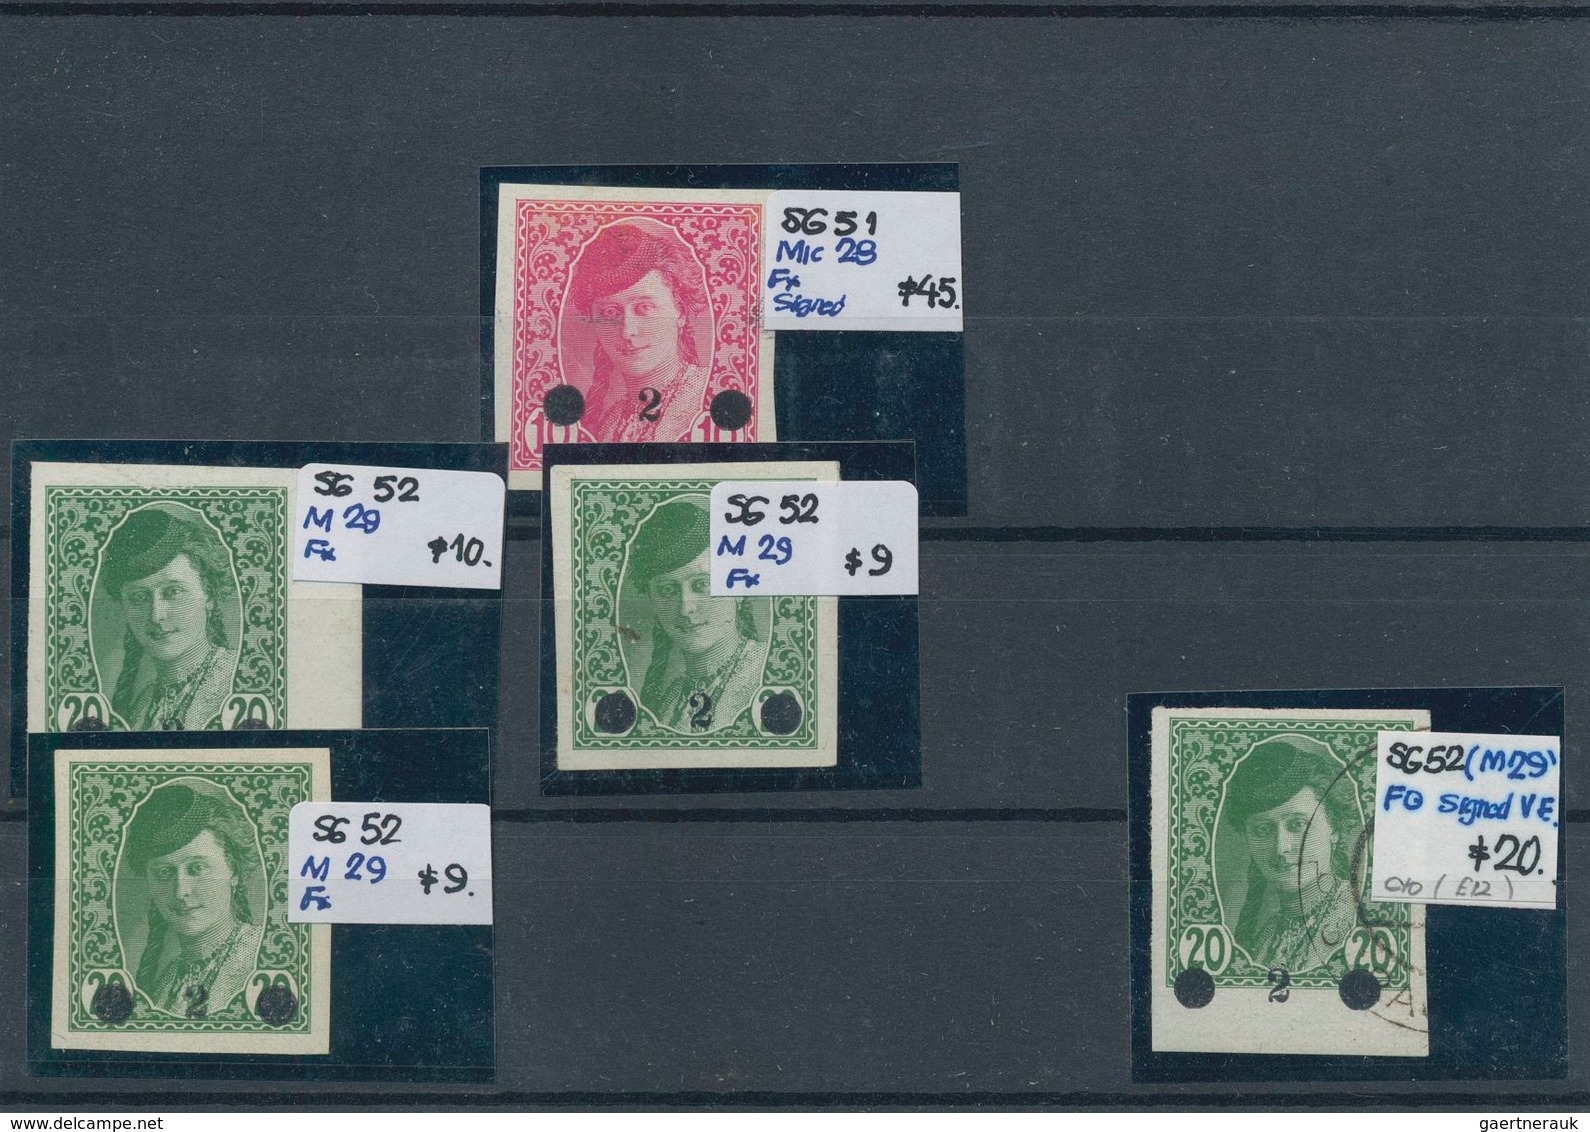 Jugoslawien: 1918/1920, mint and used holding on stockcards in a small binder, comprising issues for